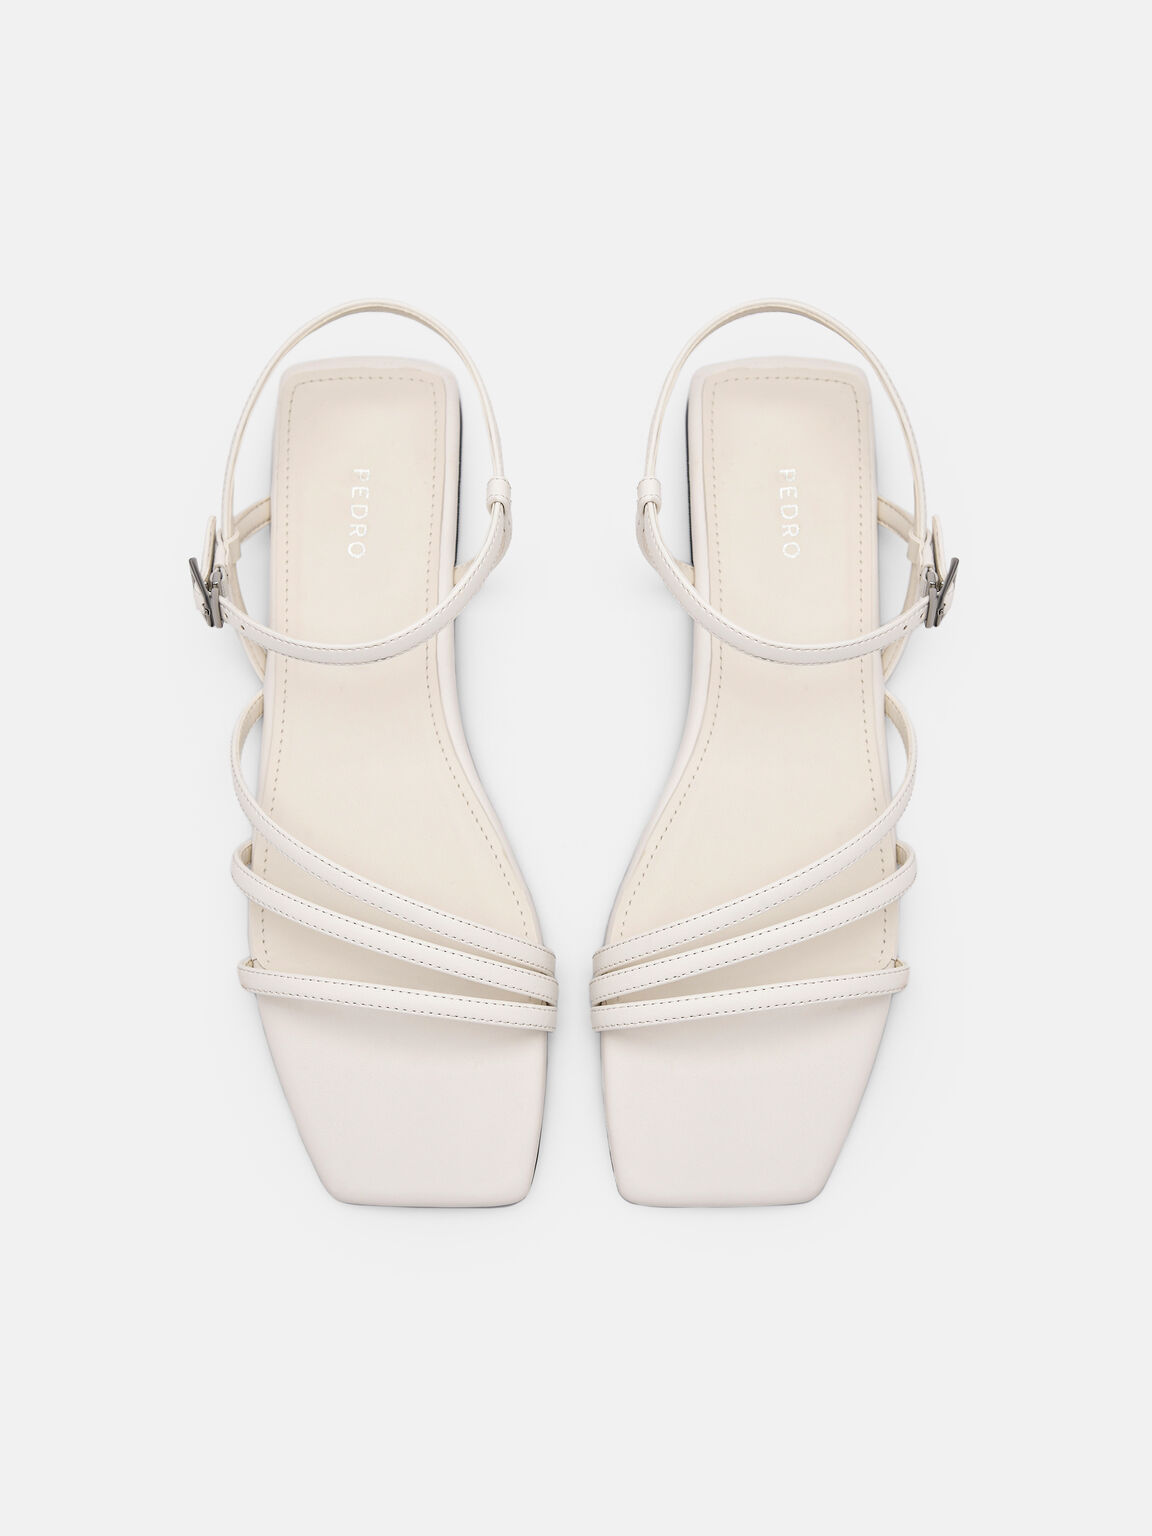 Peggy Ankle Strap Sandals, White